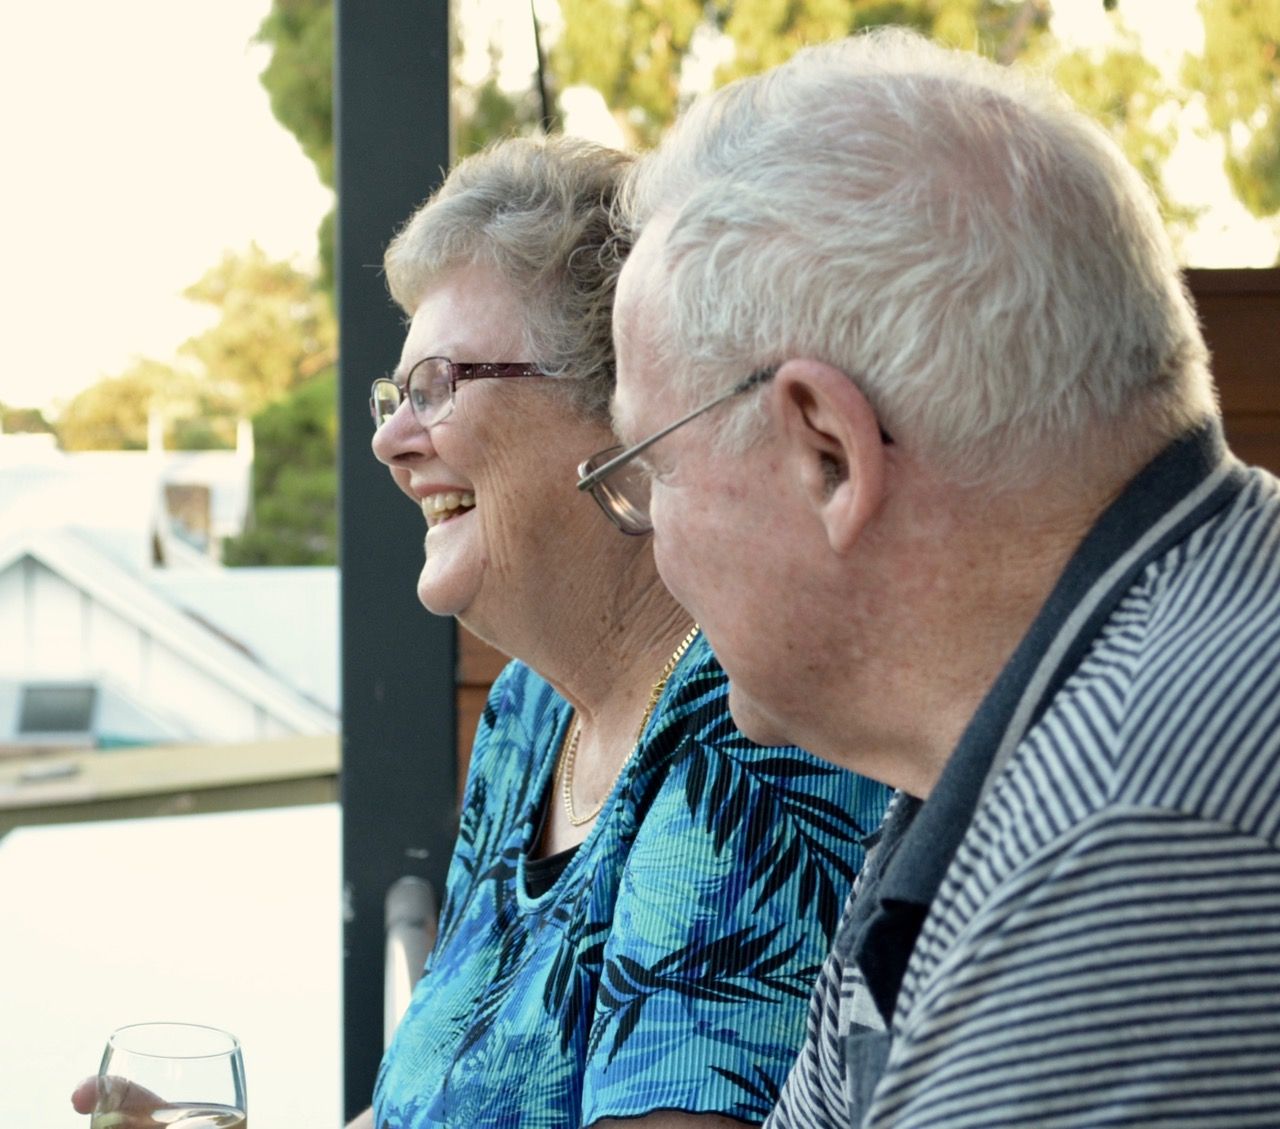 Australian retired couple smiling with a glass of wine